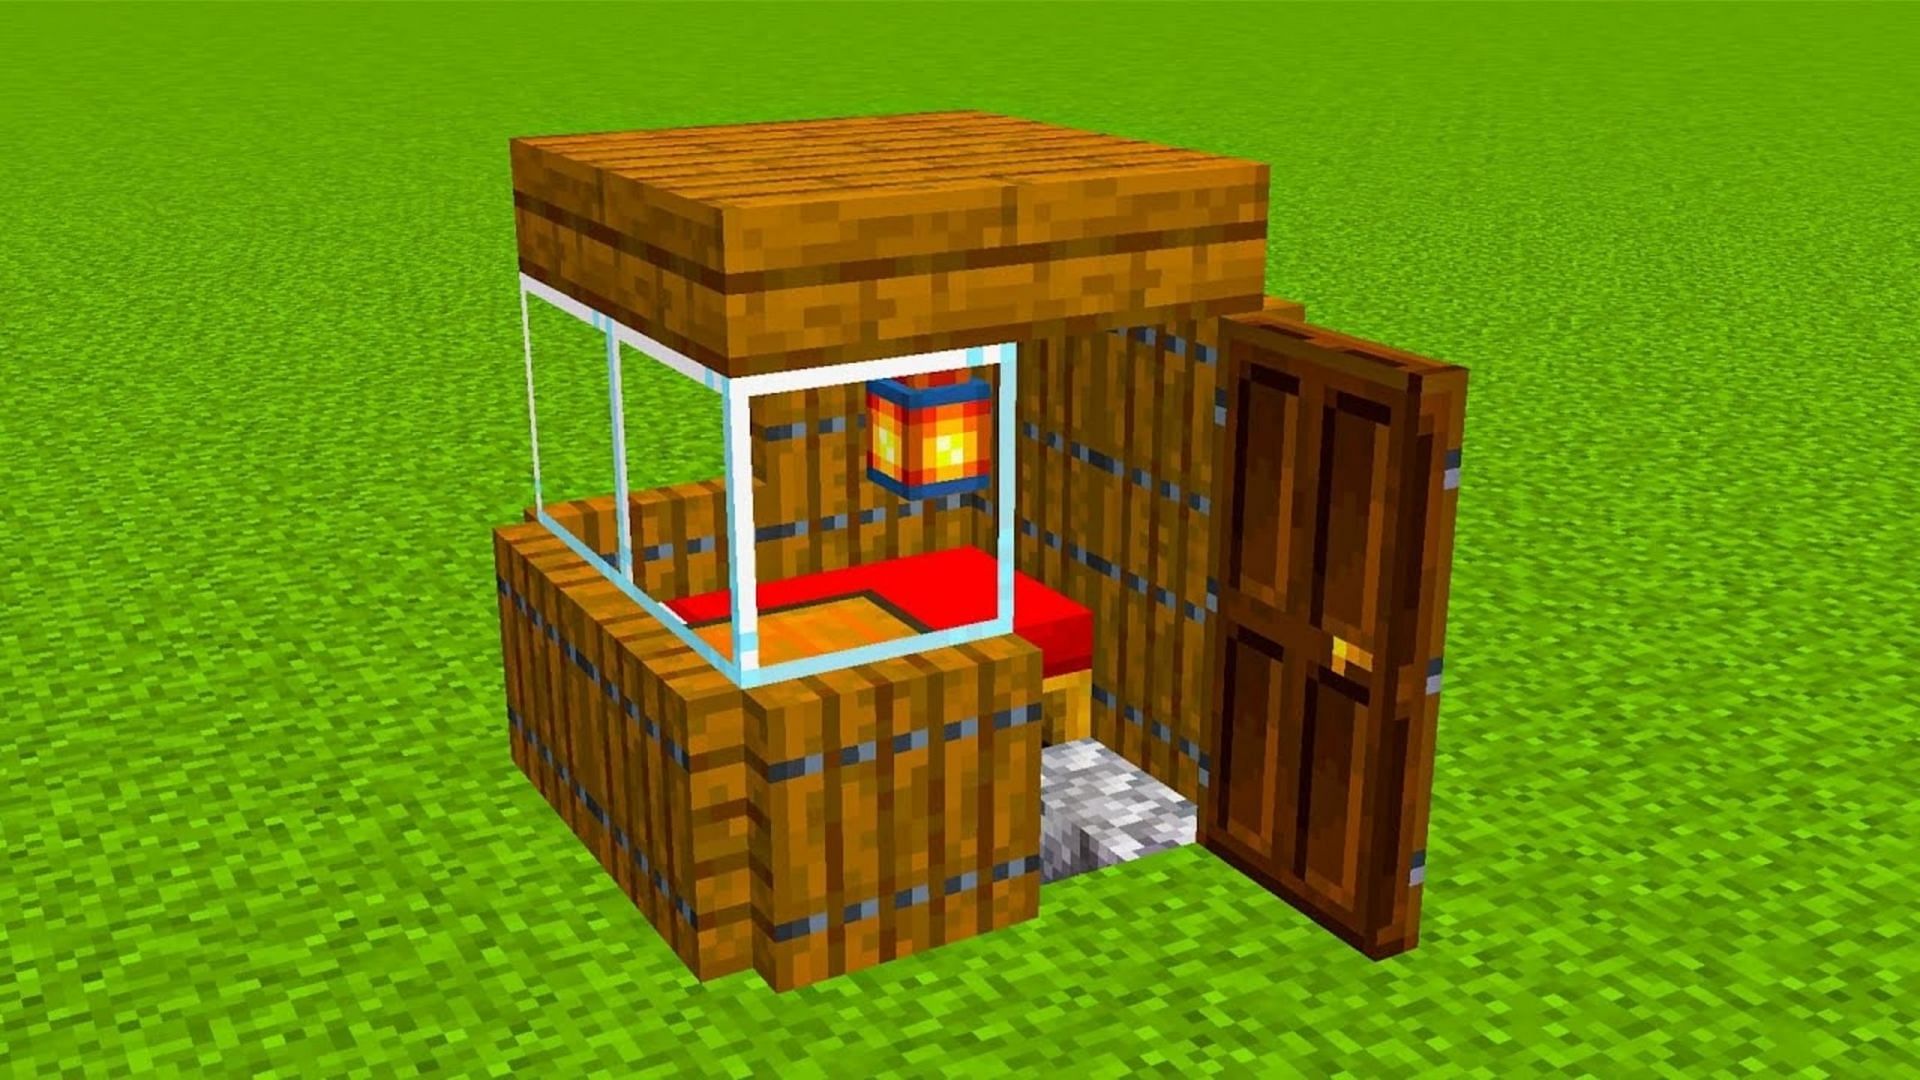 This design is about as small as a functional Minecraft house can get (Image via Confuz/YouTube)